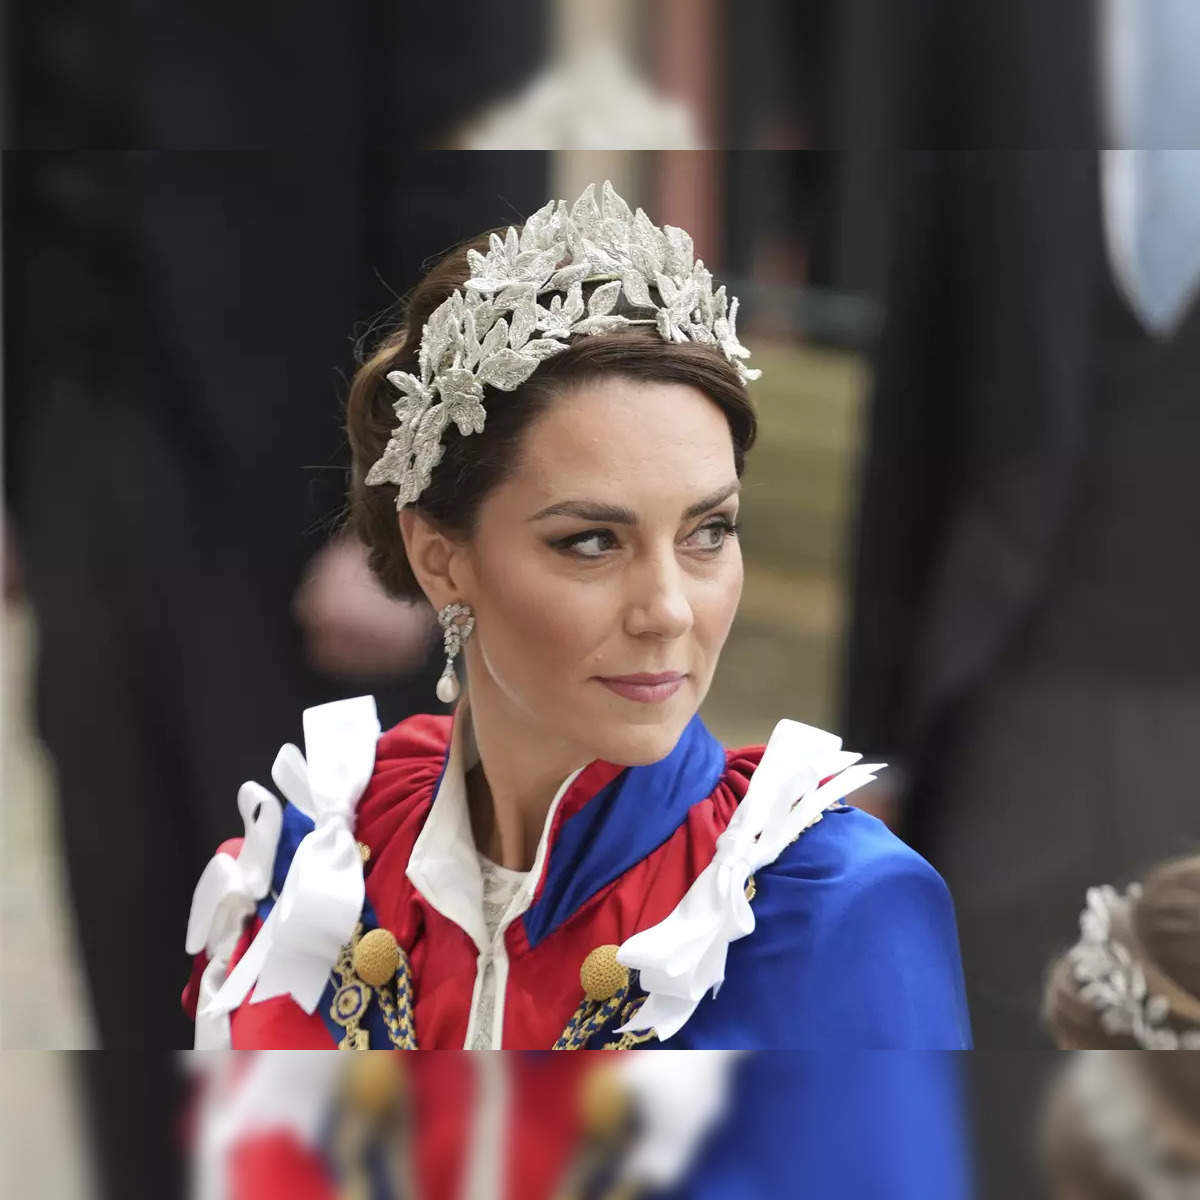 Will Kate Middleton Wear a Tiara to the Coronation of King Charles III?